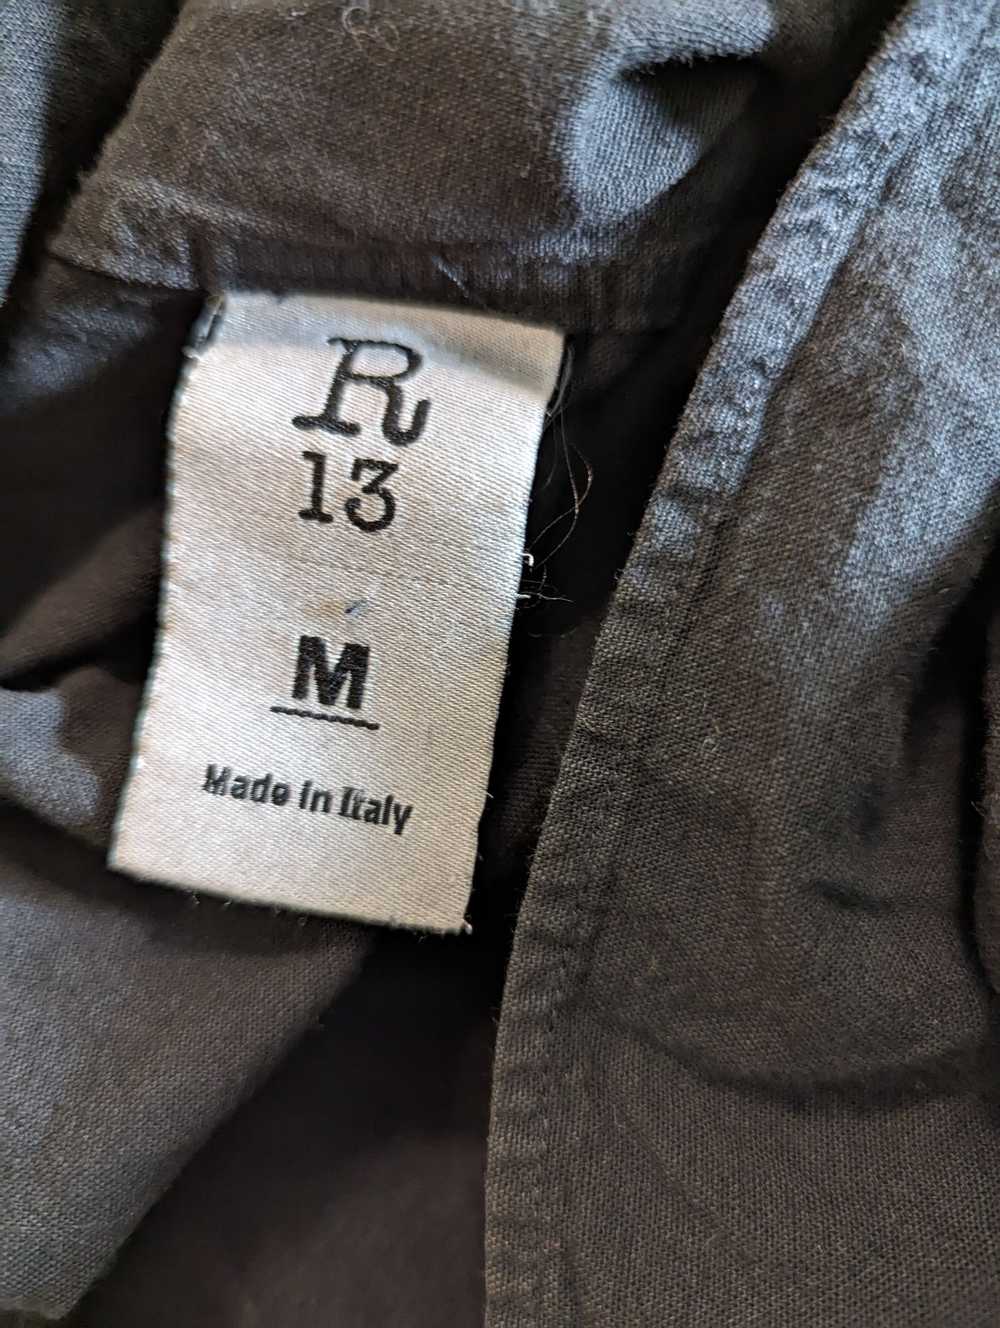 R13 Shirt, made in Italy - image 5